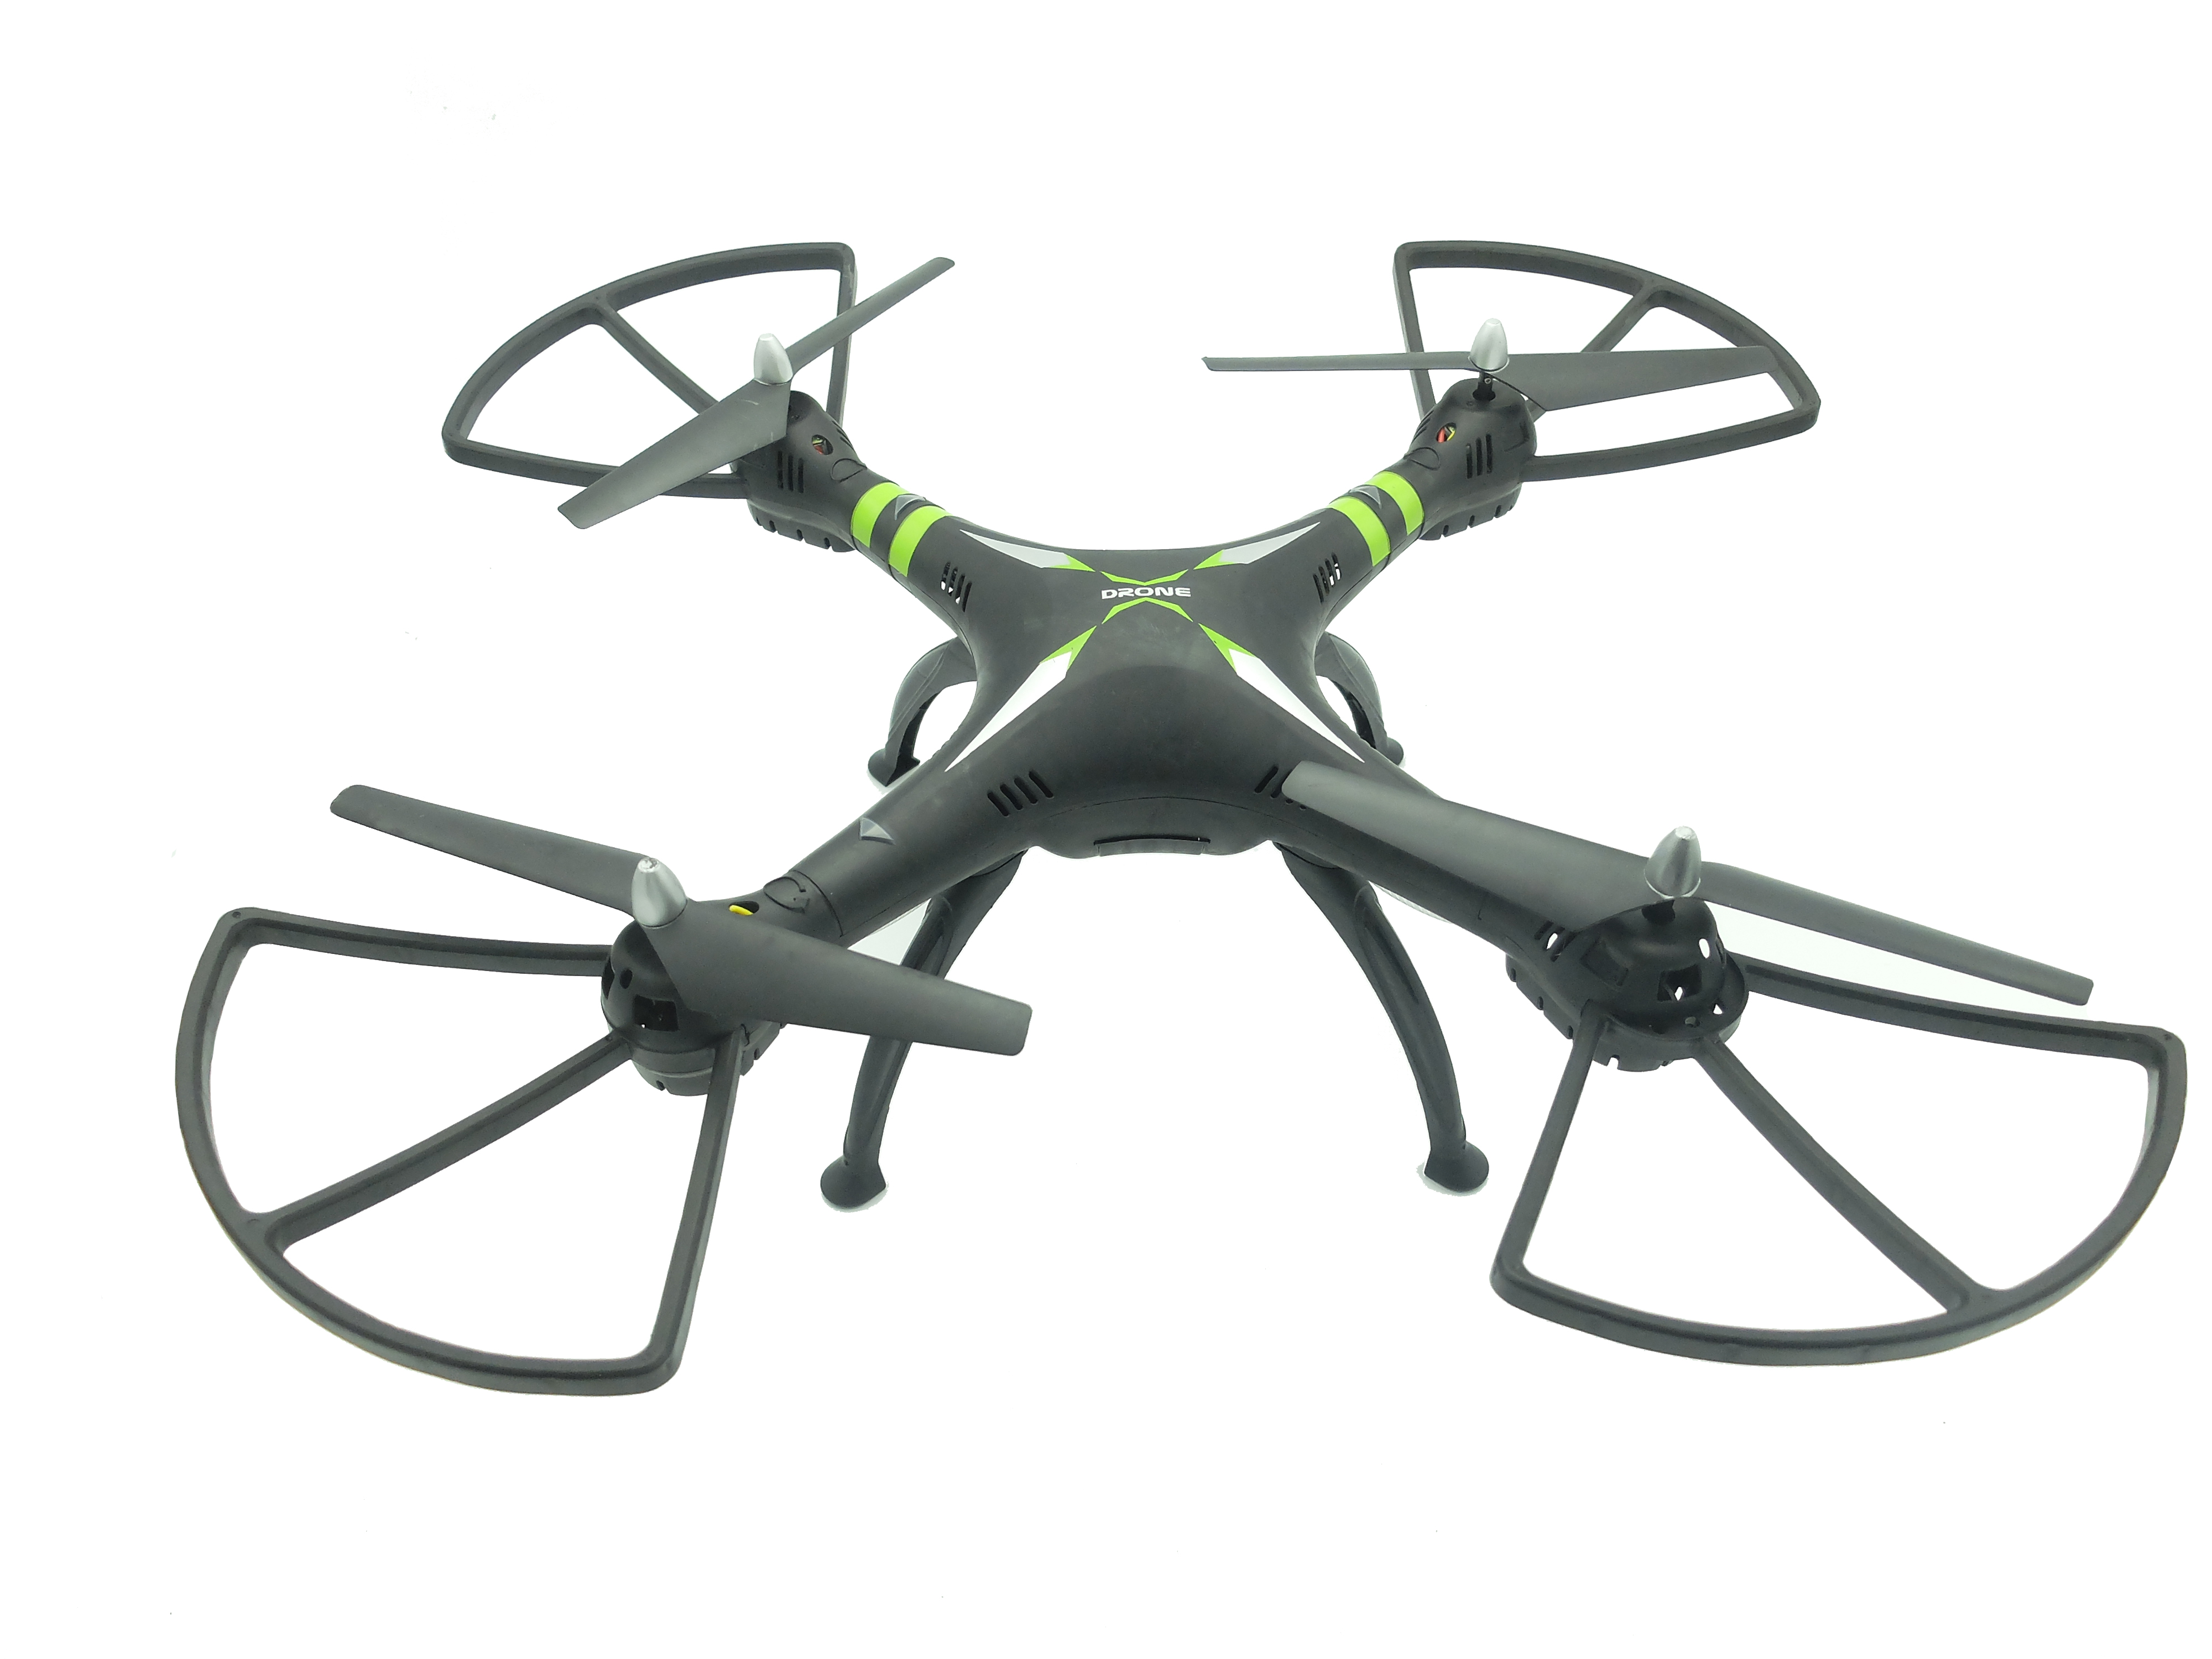 Hot selling rc drone toy made in china